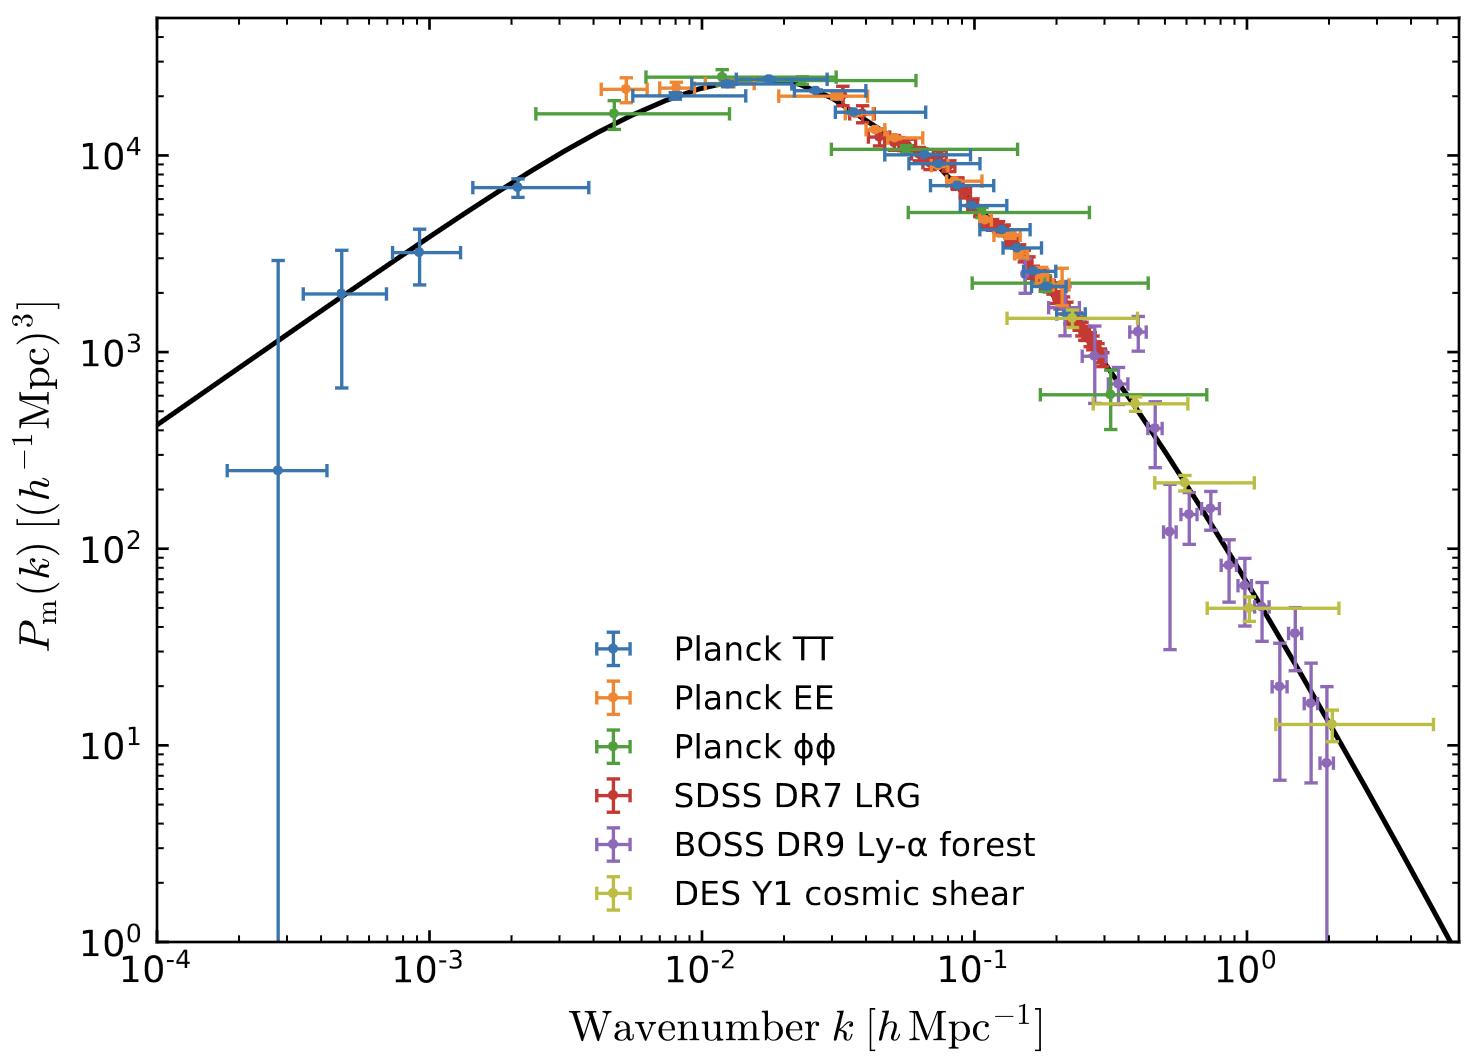 A logarithmic plot of the full matter power spectrum versus wavenumber, which rises from around 300 to a peak of around 30000 at a wavenumber of about 0.015, then declines to the right of the plot at a faster rate. Individual data points from Planck TT, EE, and φφ are overlaid, along with from SDSS DR7, BOSS DR9, and DES Y1. 